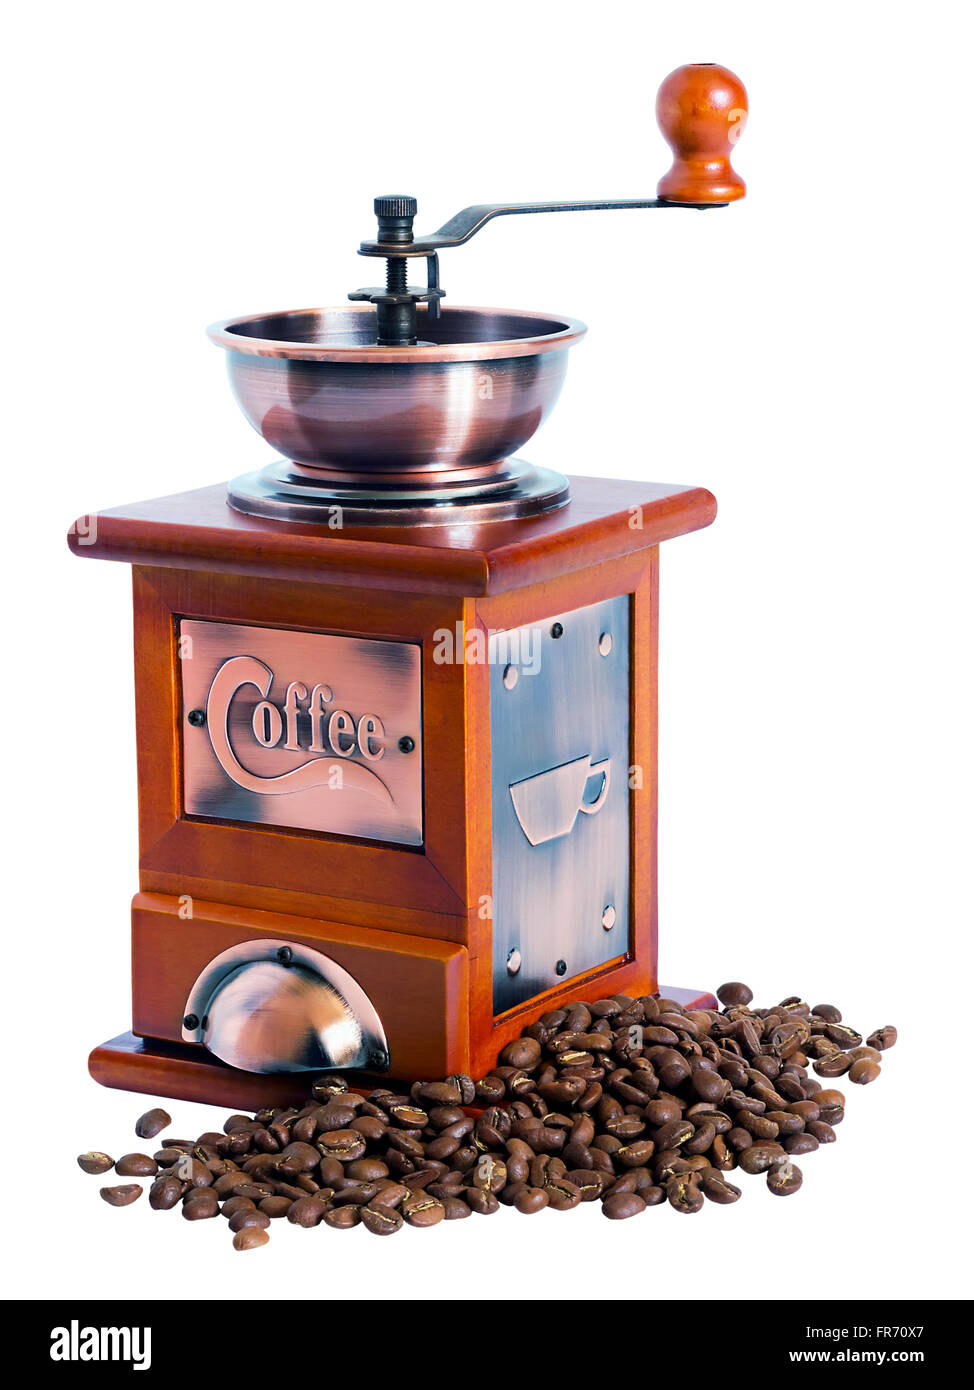 manual coffee grinder with coffee beans isolated on white background Stock Photo